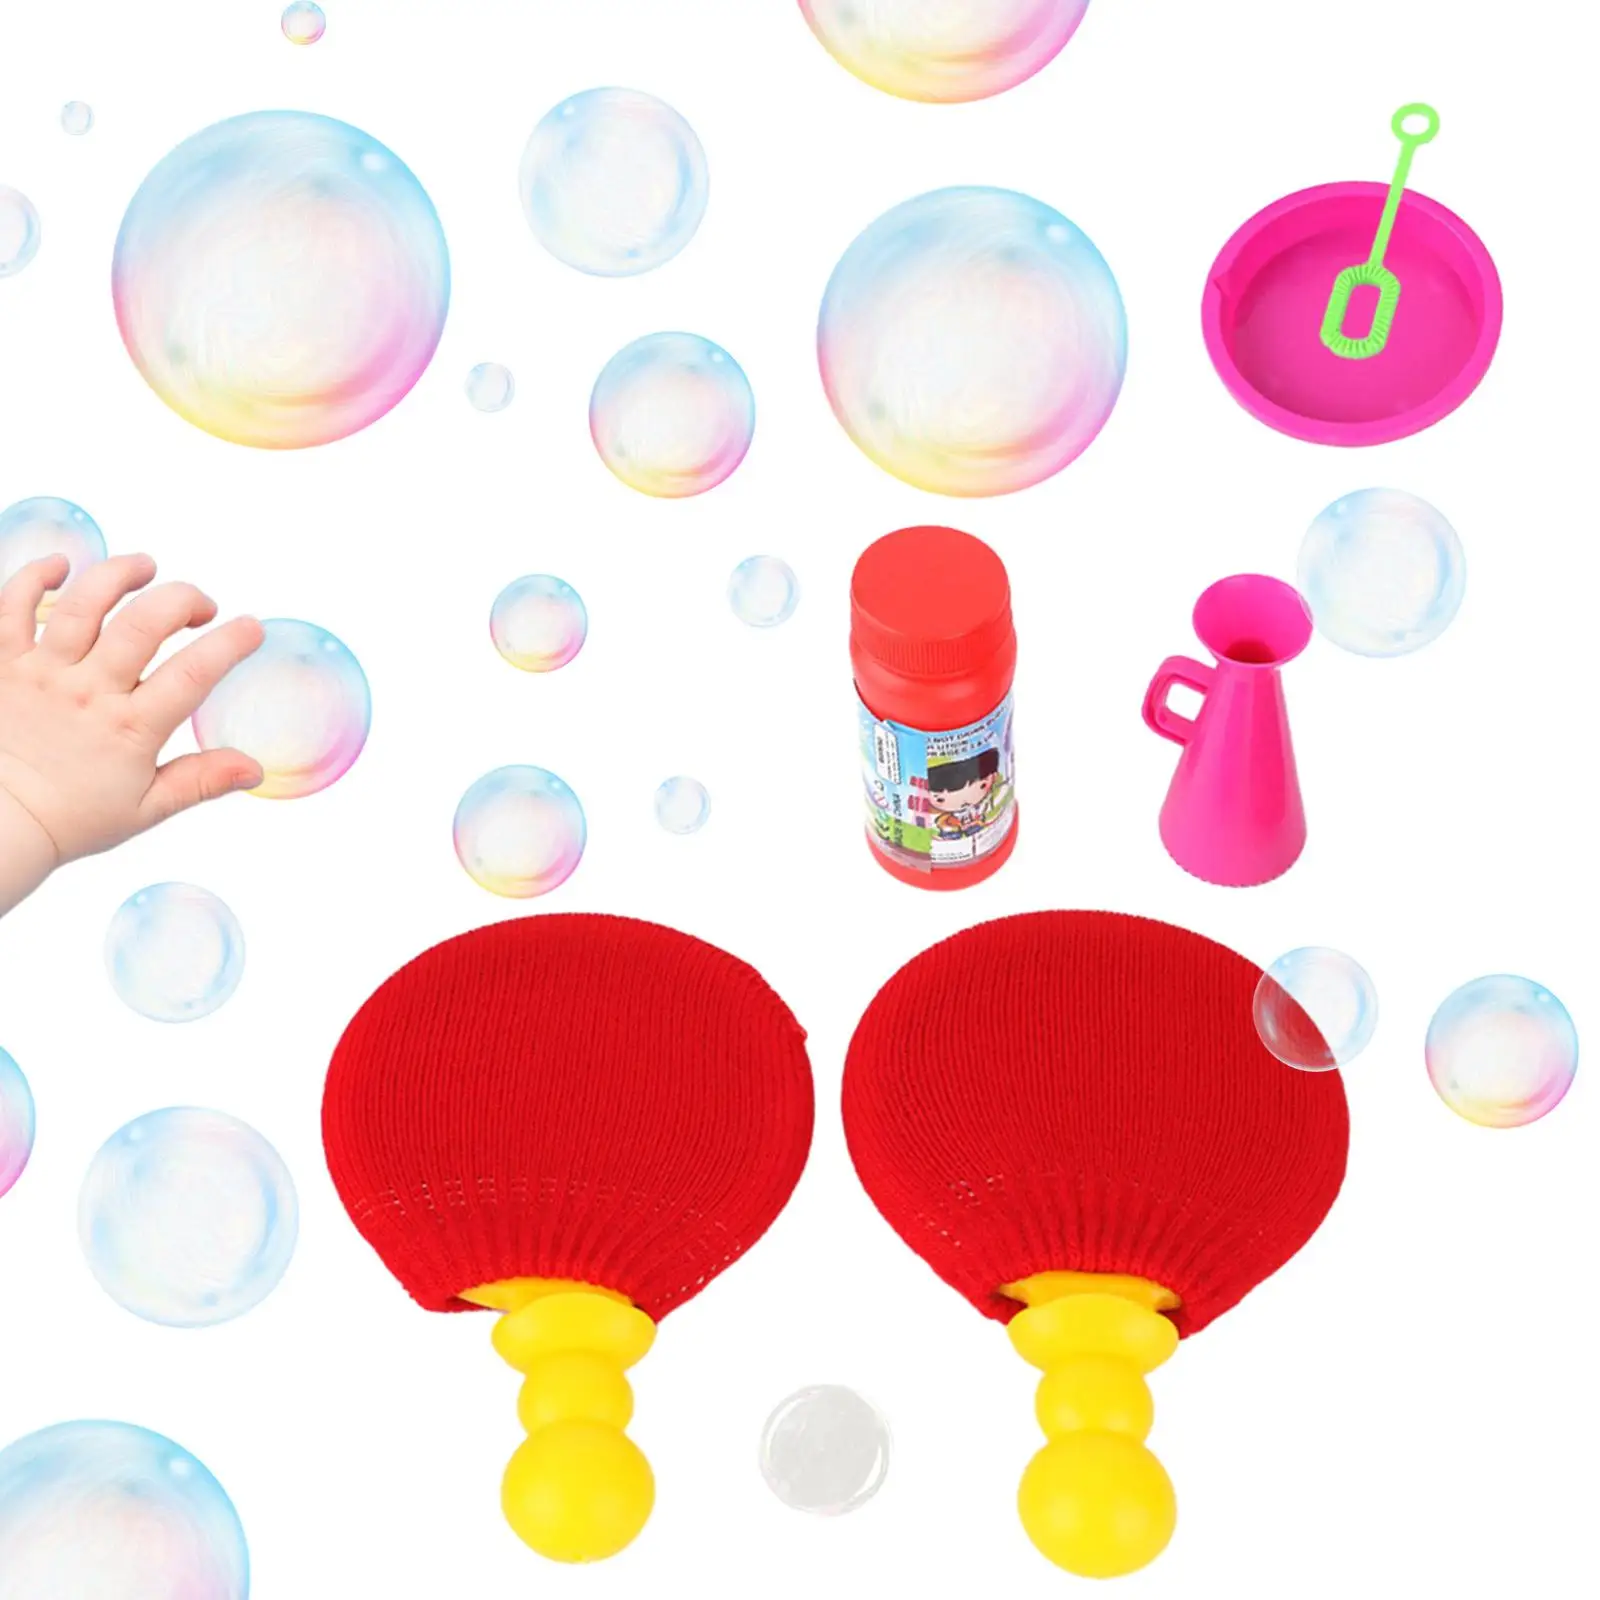 Touchable Bouncing Bubble Kits Indoor and Play Garden Play Games Big Bubble Maker Game for Children Girls Boys Great Gift